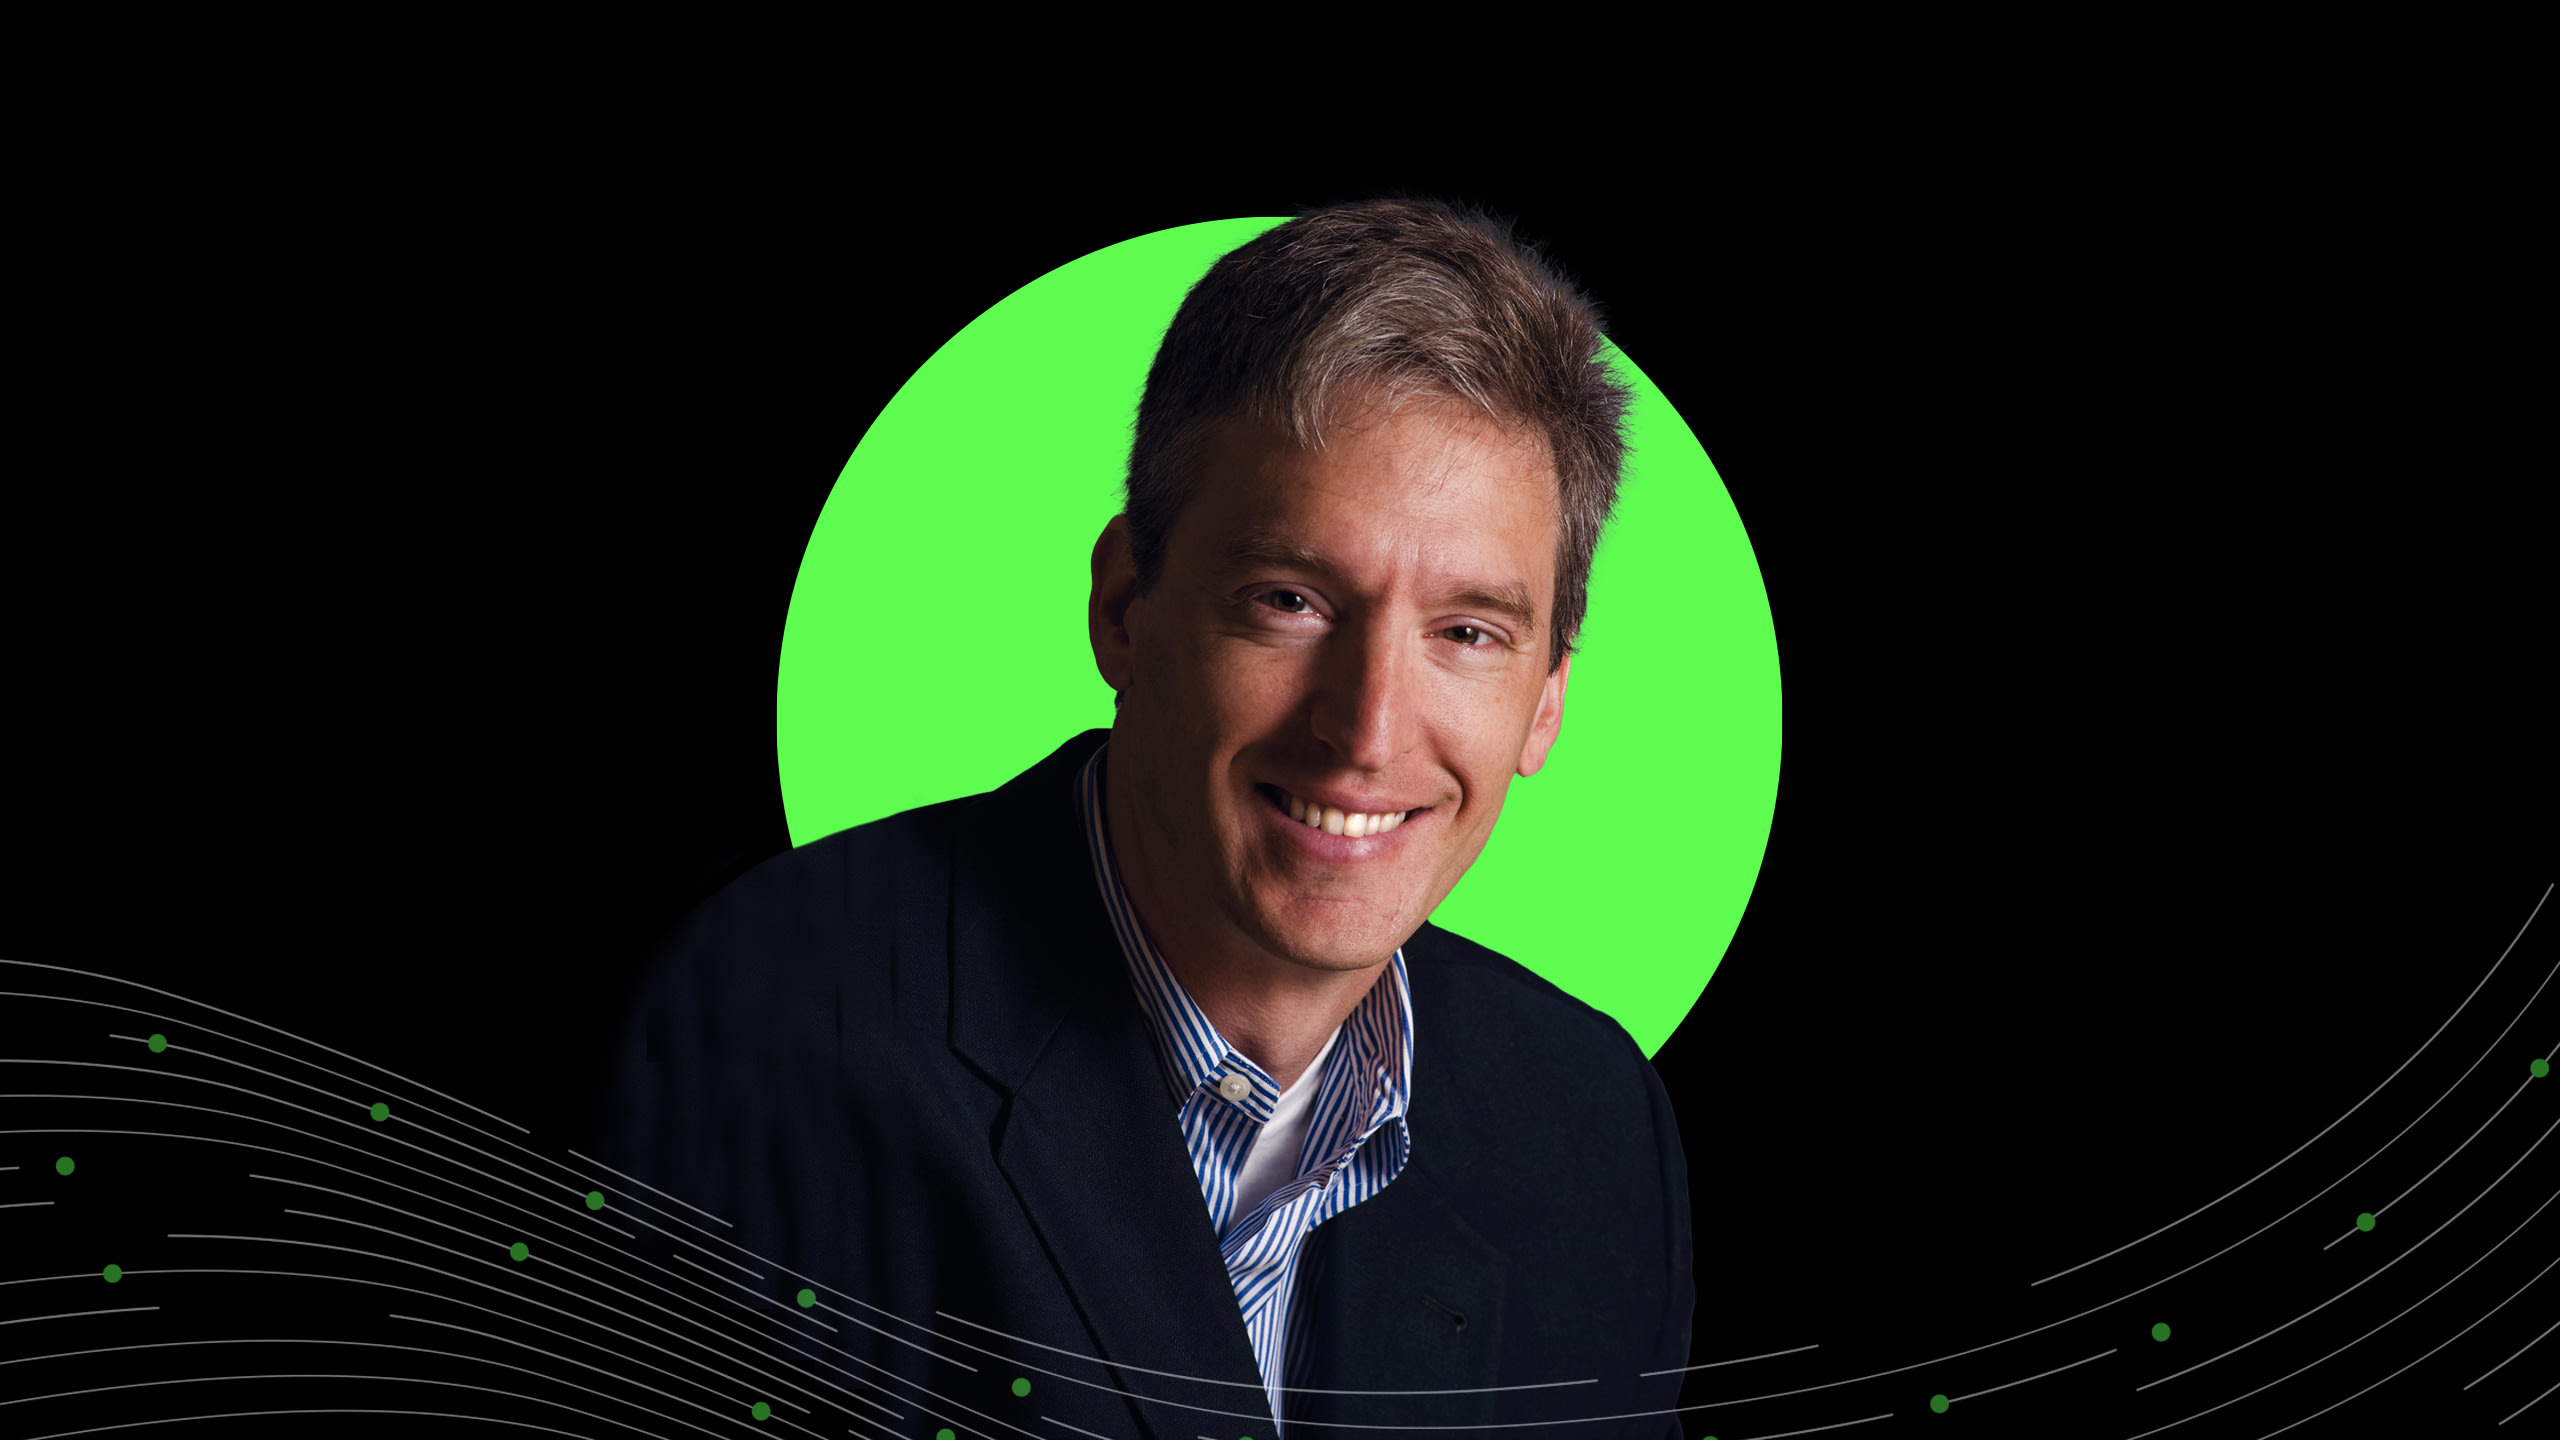 Steven Levitt, economist and author of “Freakonomics”, will show you the “hidden side of your business” at the Celonis World Tour. 